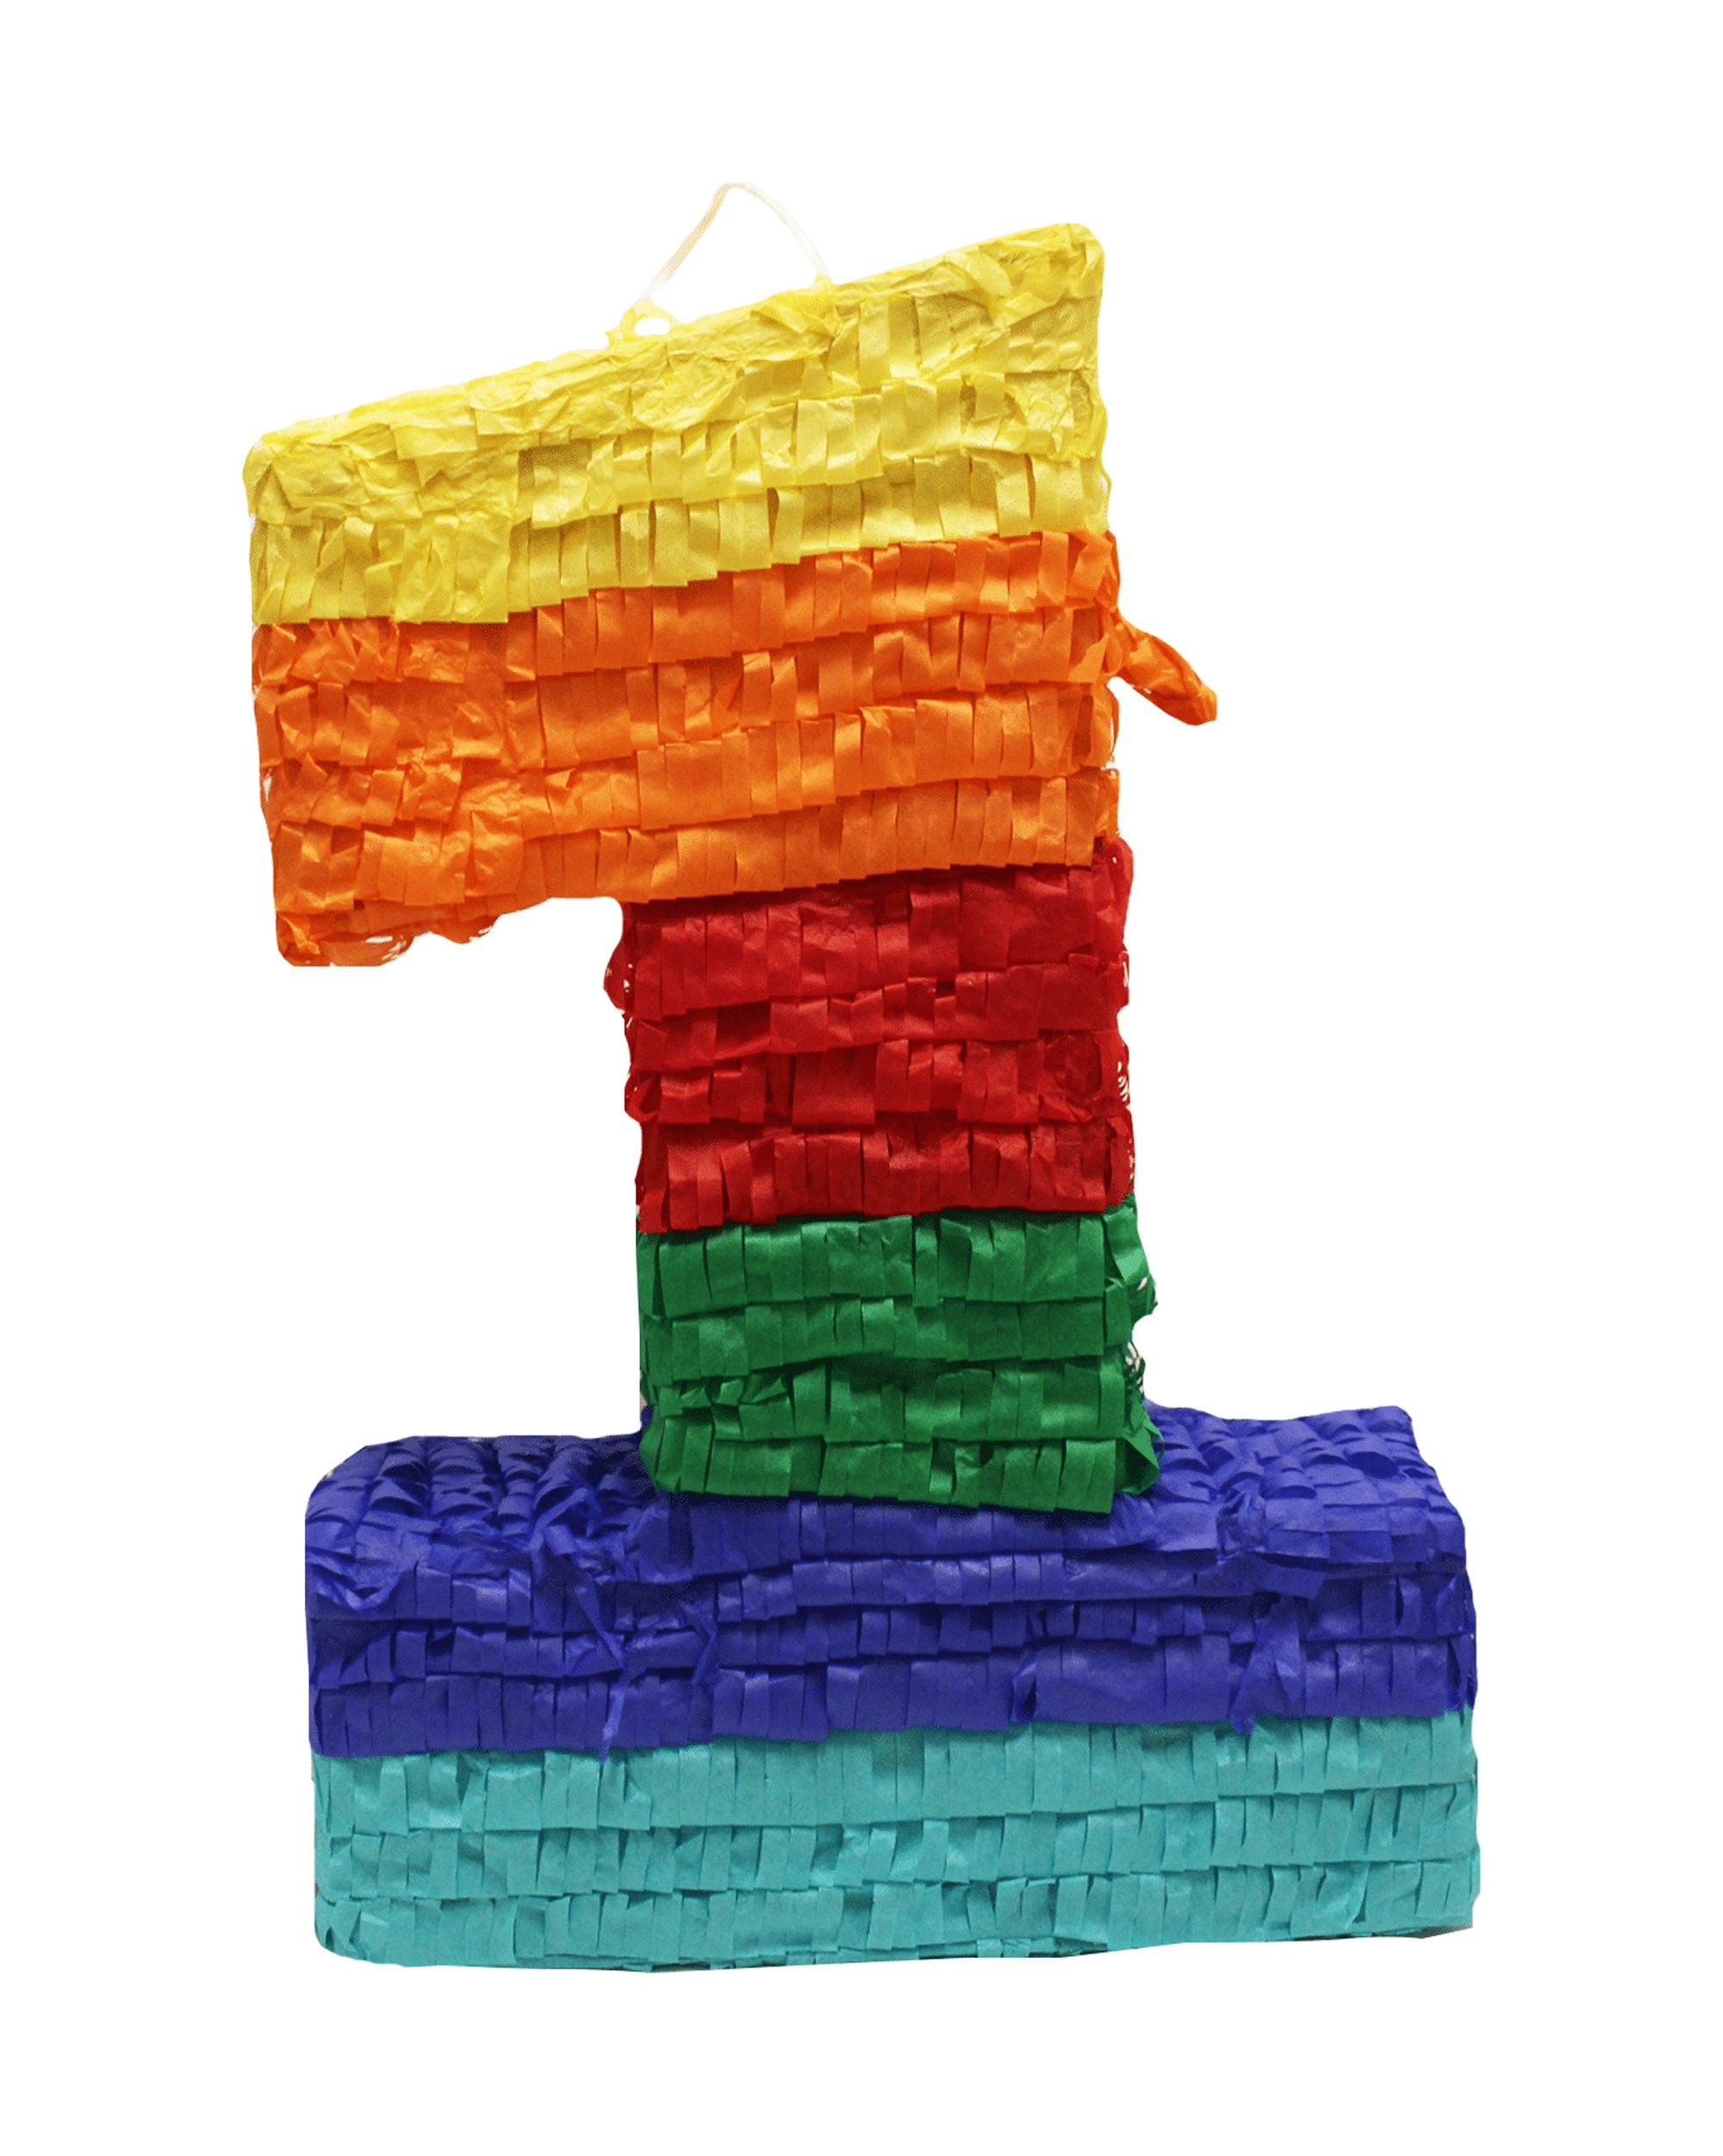 LaLa Imports 3D Number One Pinata, 19.5 in x 13.5 in x 4 in